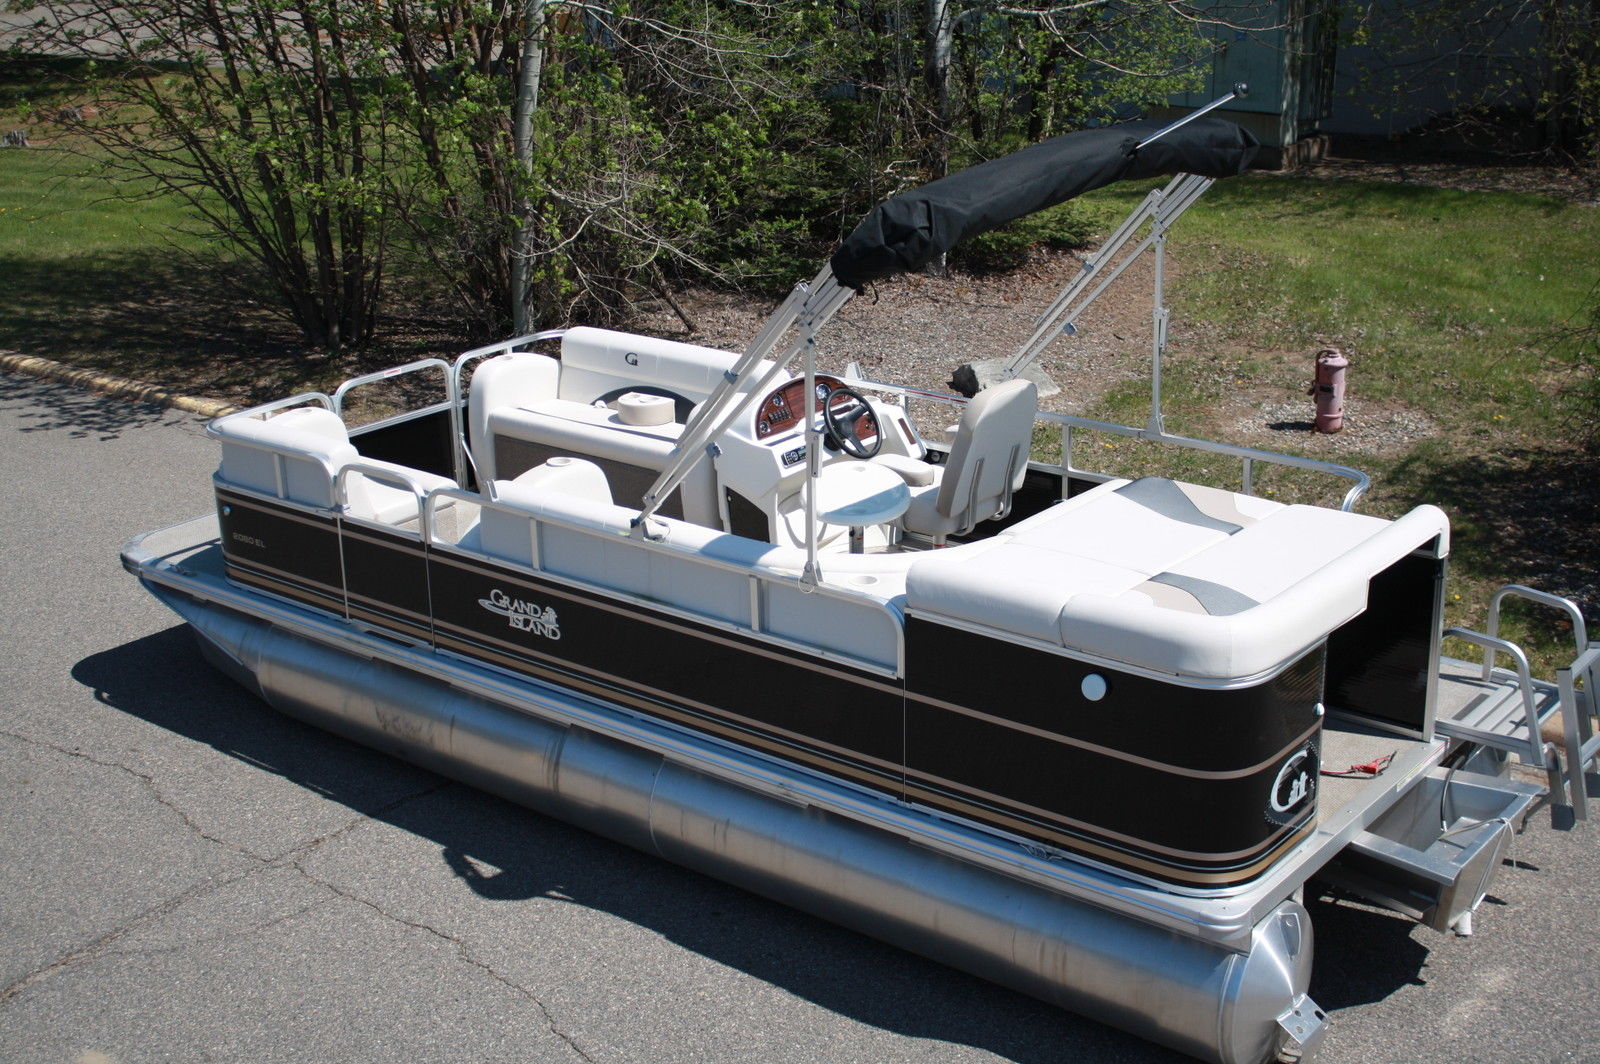 Grand Island 20 El Cruise 2014 for sale for $10,999 ...